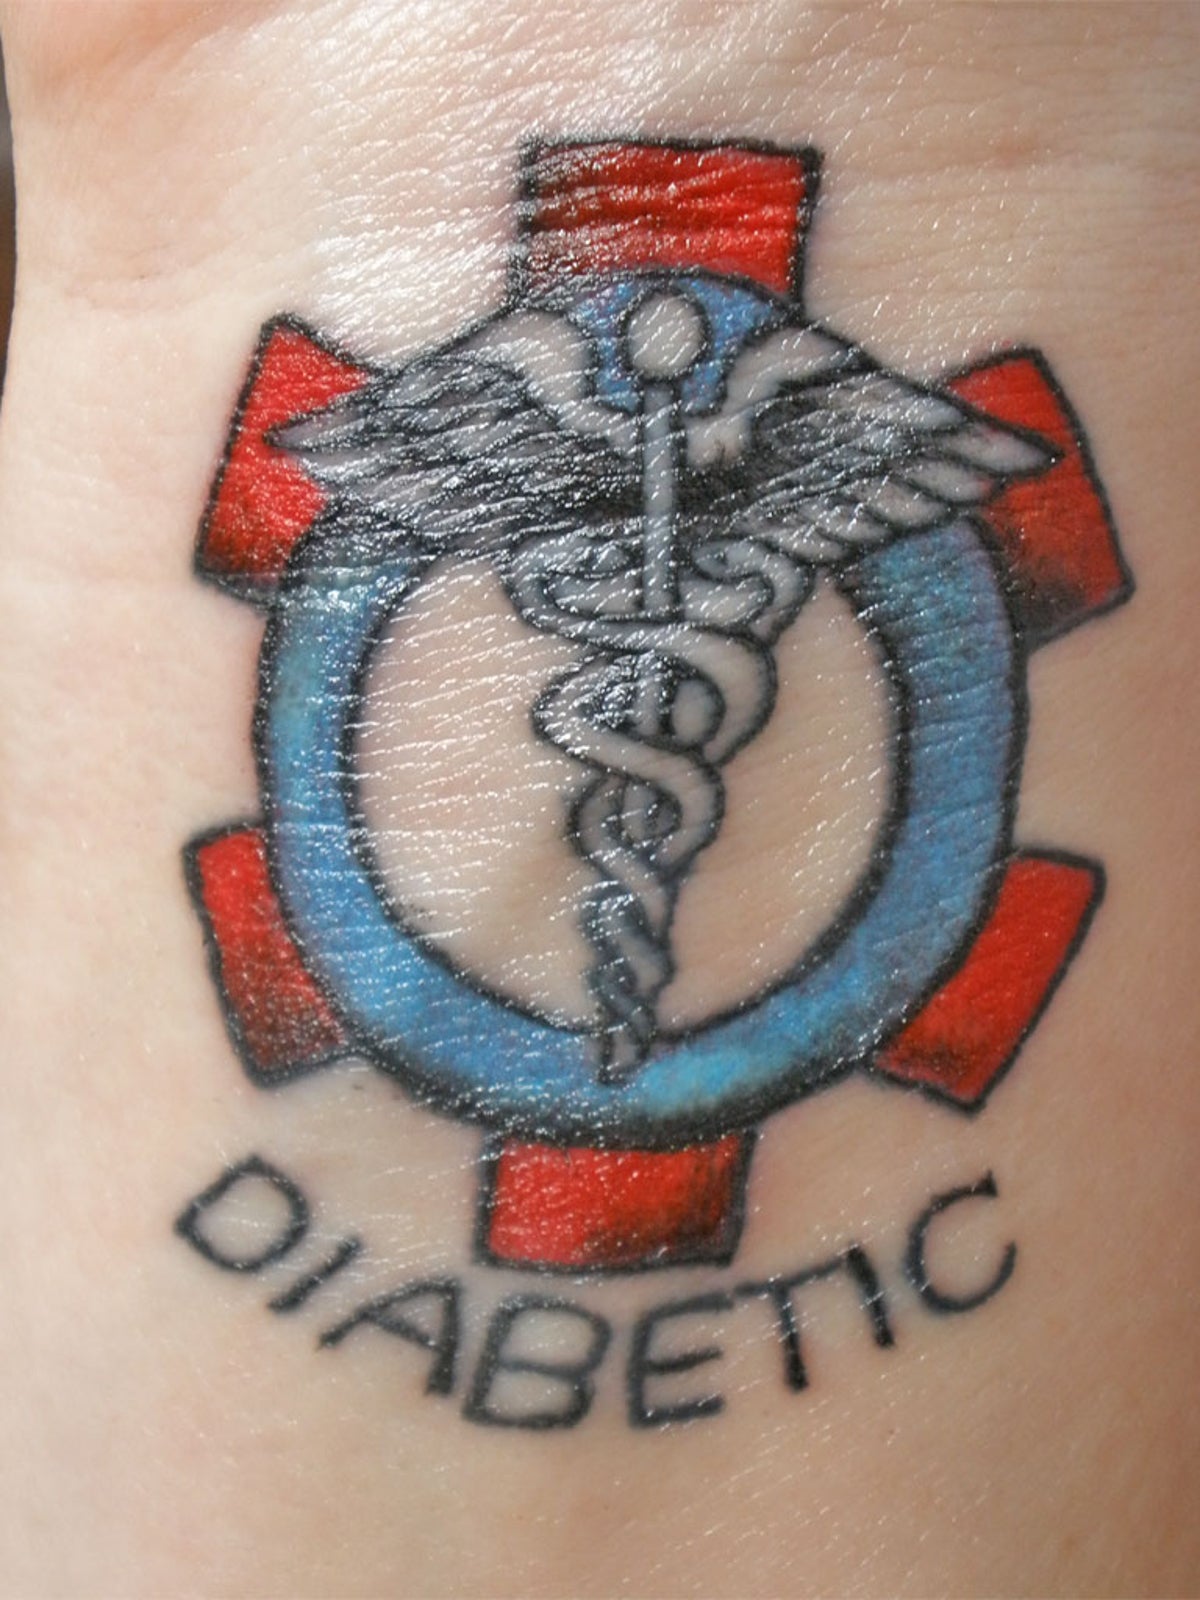 Doctor, doctor, I've got this strange tattoo | The Independent | The  Independent